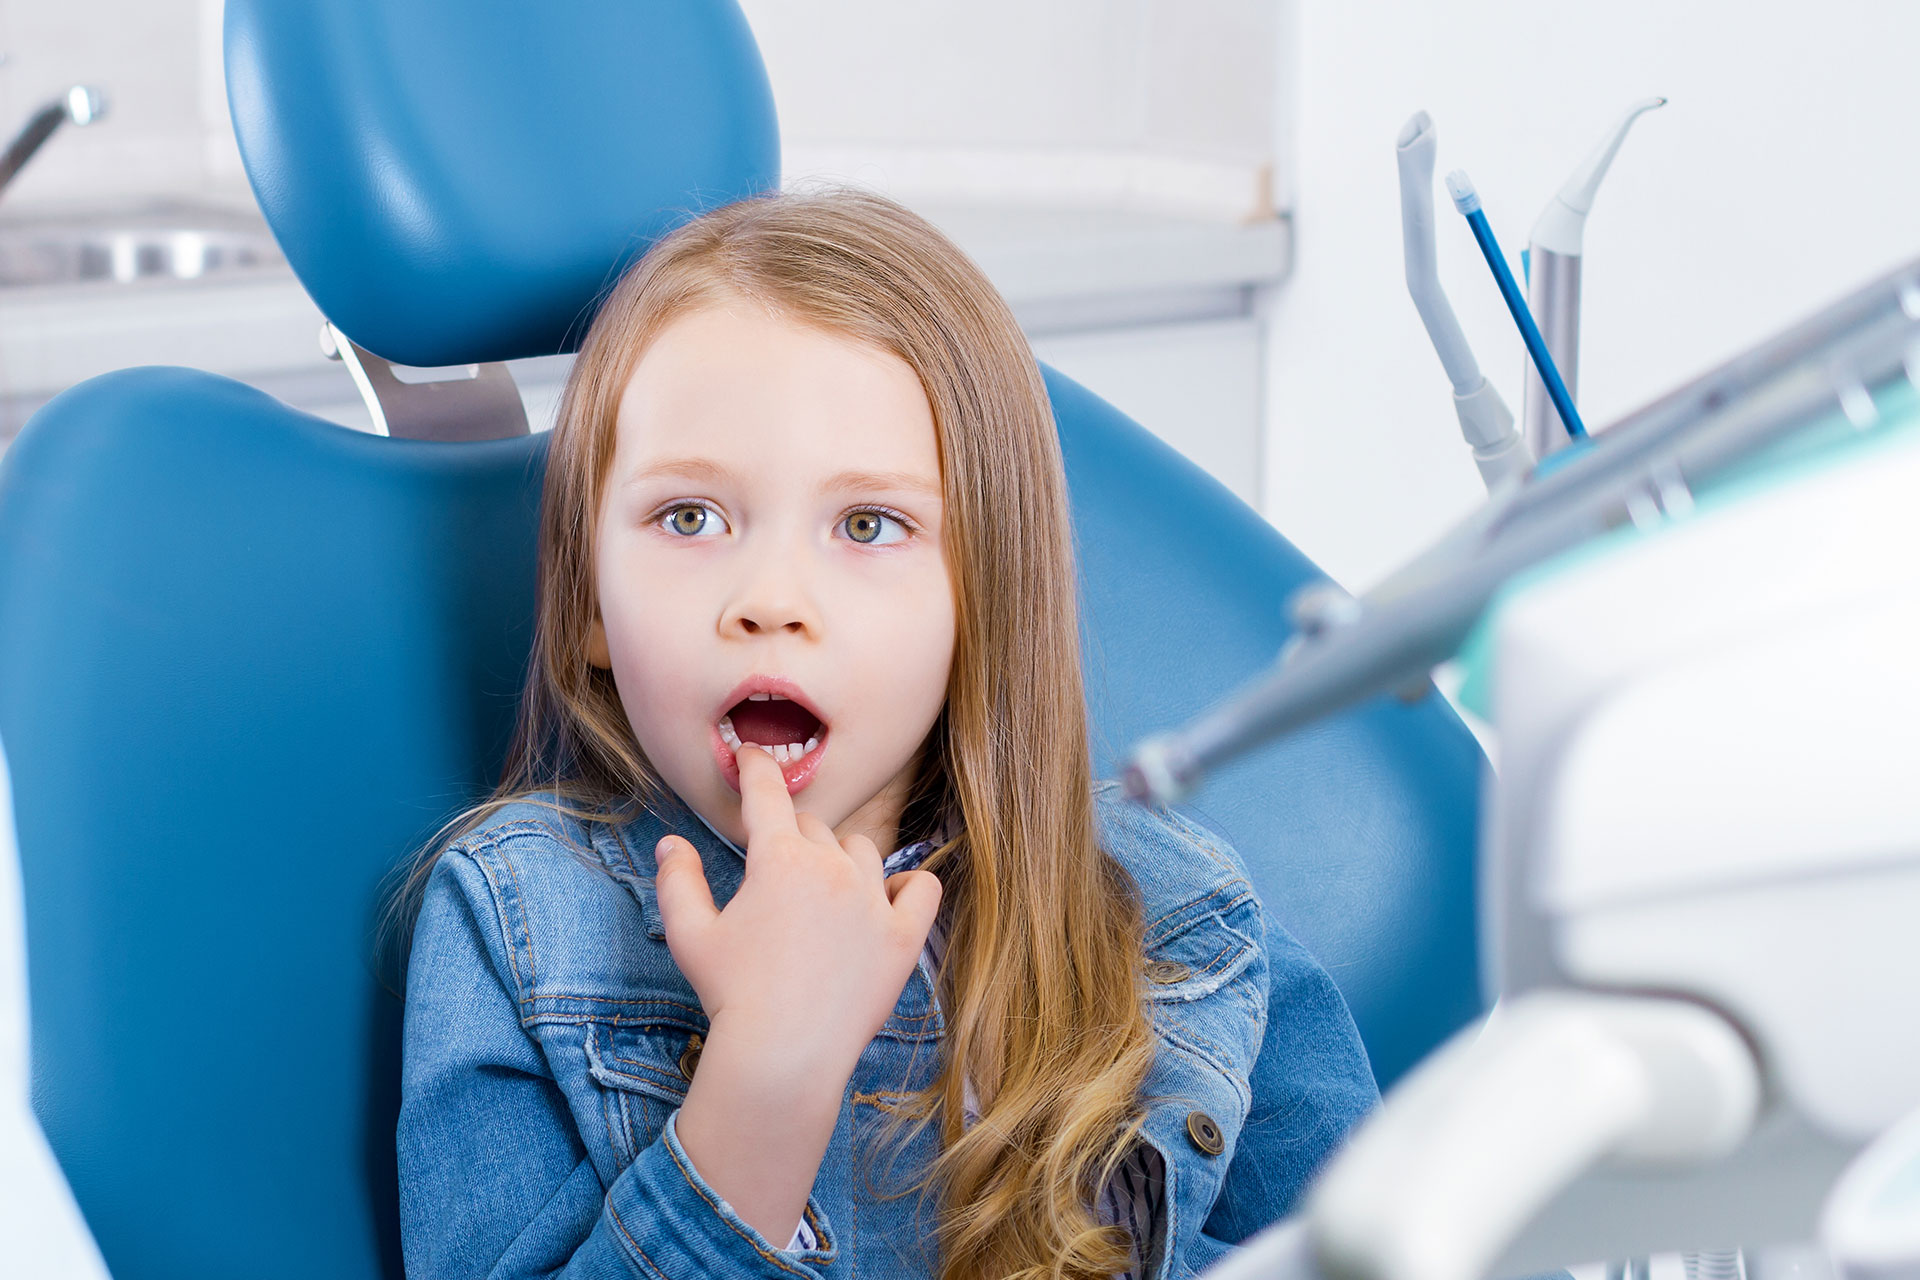 Young girl with open mouth, seated in dental chair, surrounded by dental equipment.